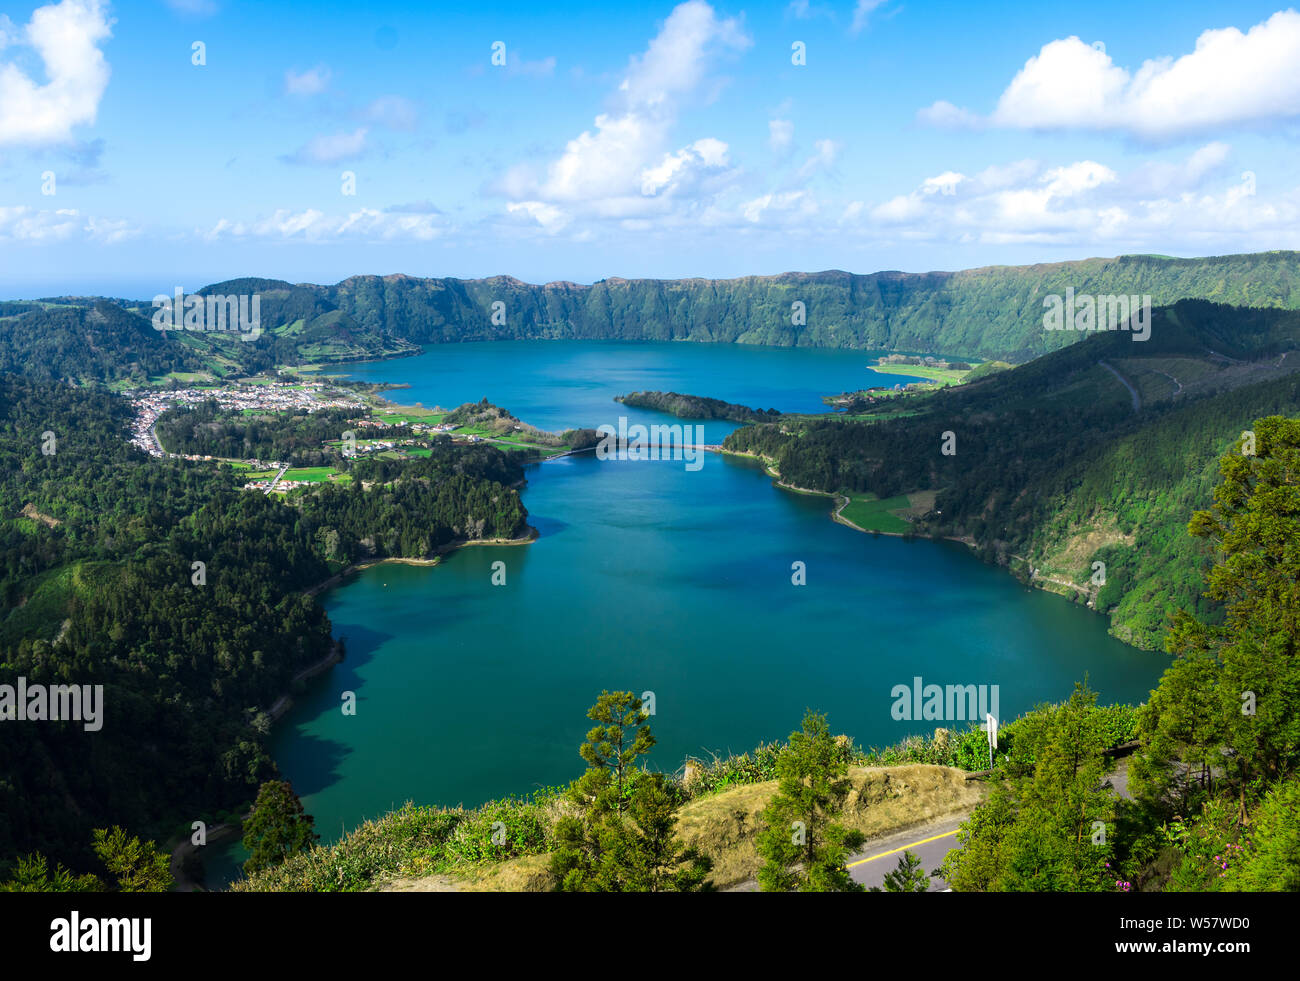 Lake of sete cidades of the azores islands, Portugal Stock Photo